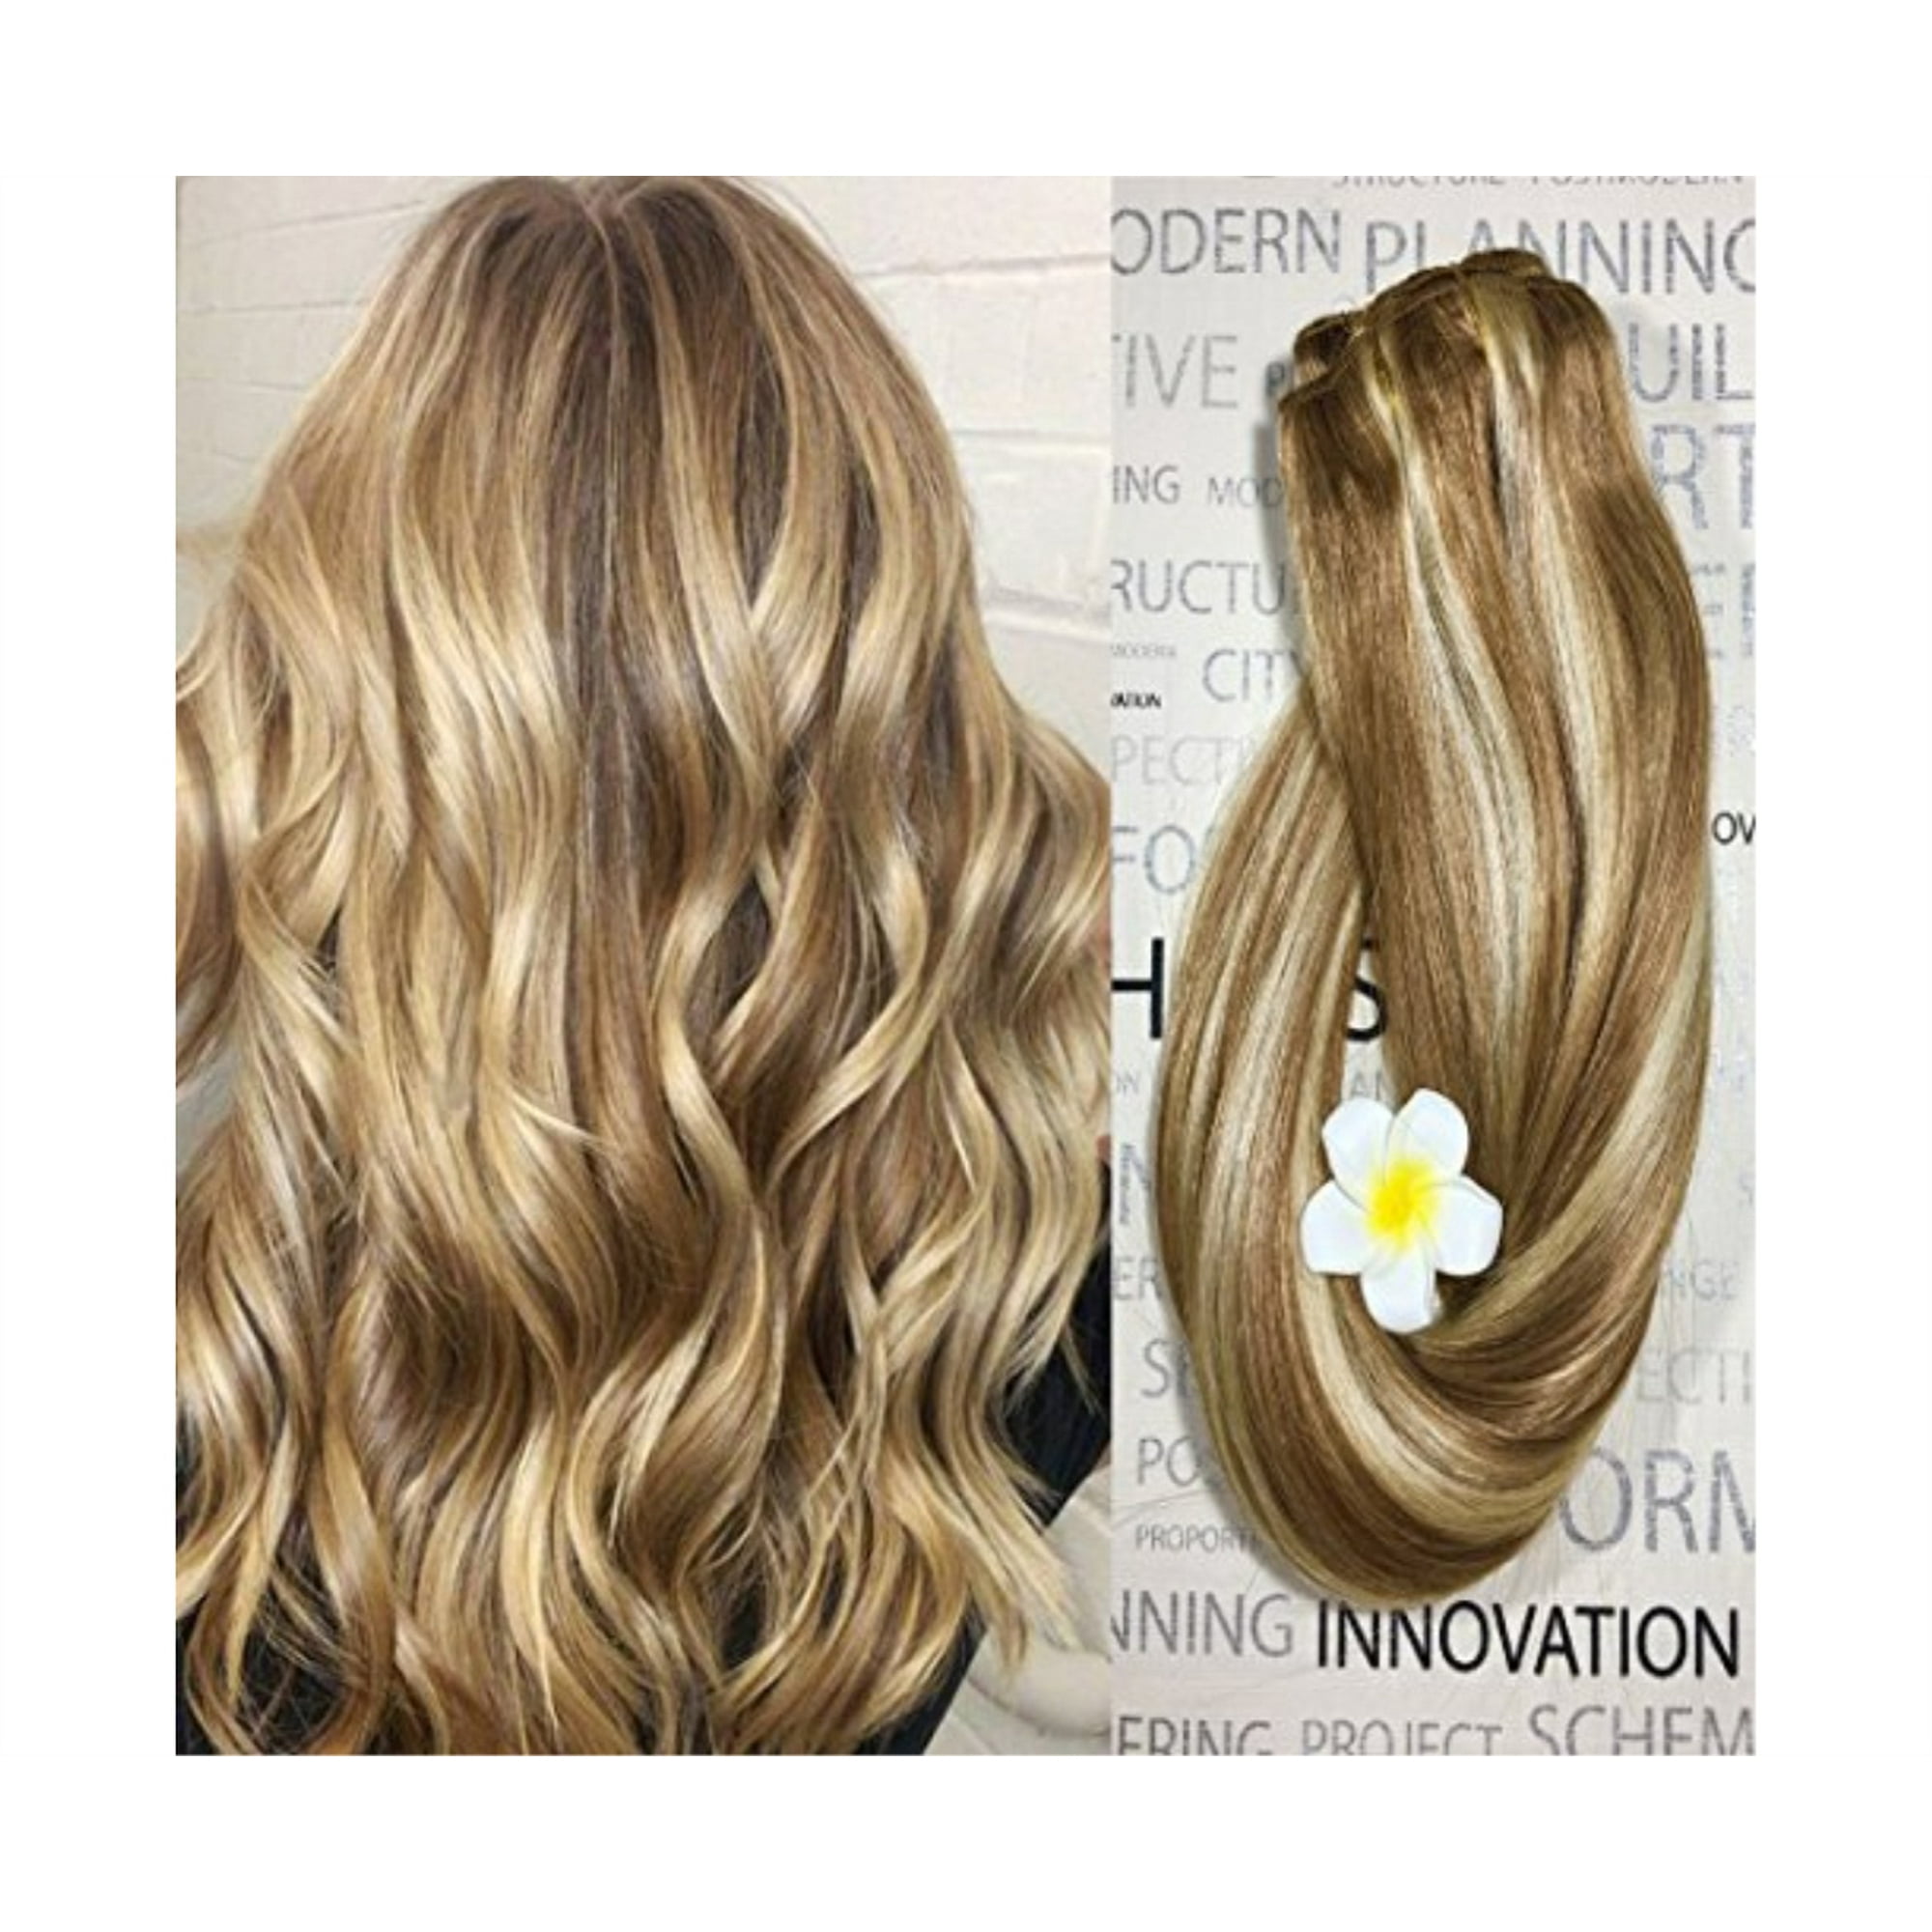 Clip In Hair Extensions Human Hair Dirty Blonde Highlights 16 Inch Balayage Ombre Long Hair Extensions Clip On For Fine Hair Full Head 12 613 Straight